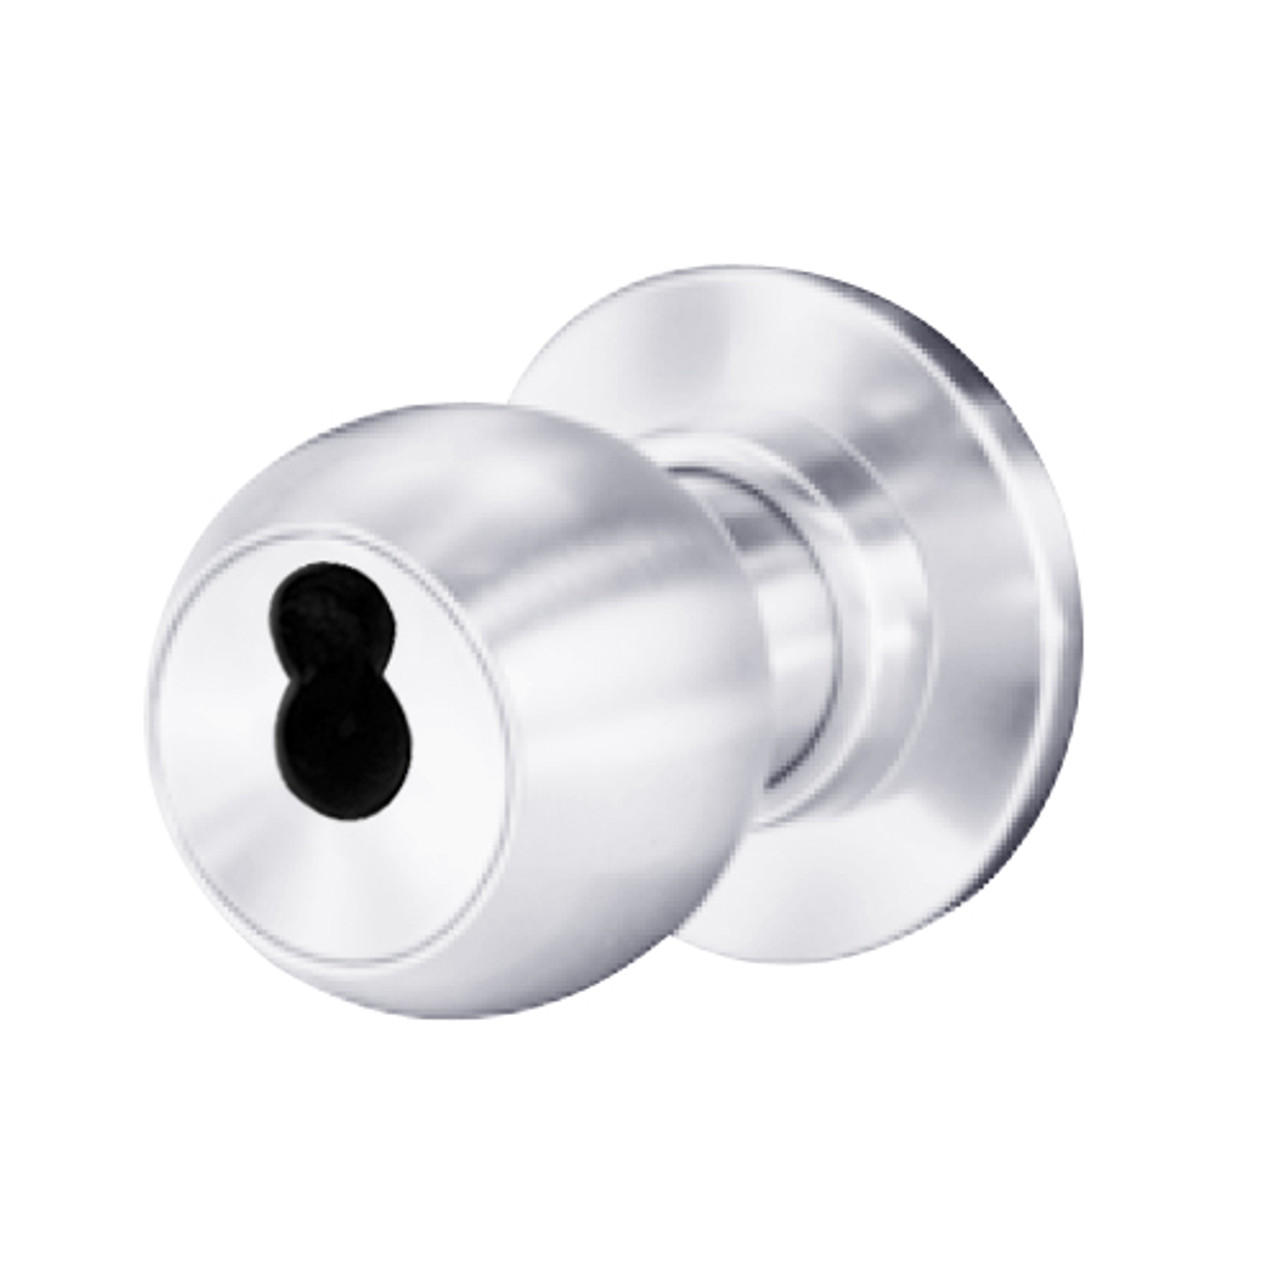 8K47EA4CSTK625 Best 8K Series Entrance or Office Heavy Duty Cylindrical Knob Locks with Round Style in Bright Chrome